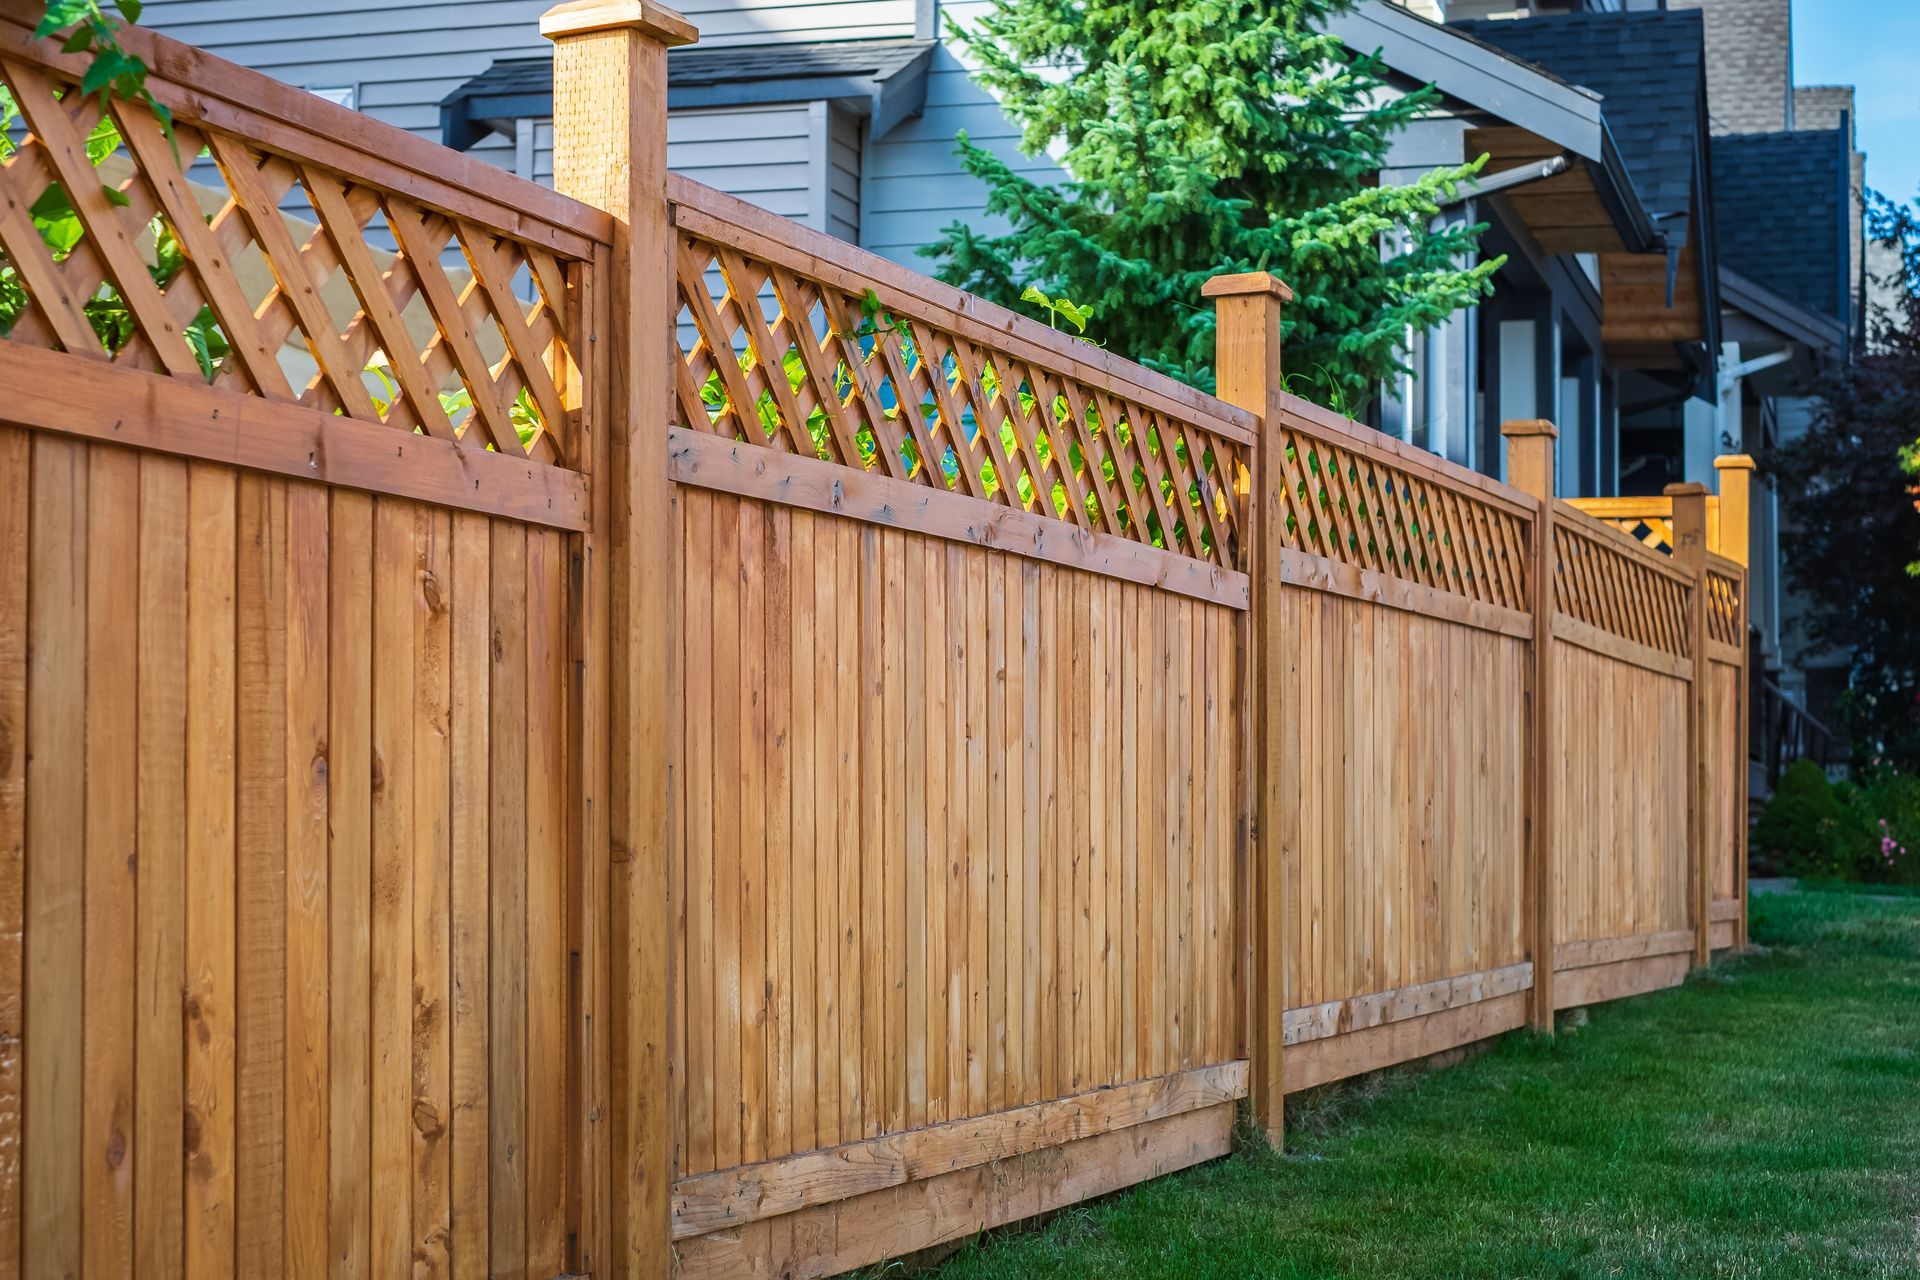 Charming wooden fence encircling a house, set against a lush green lawn.